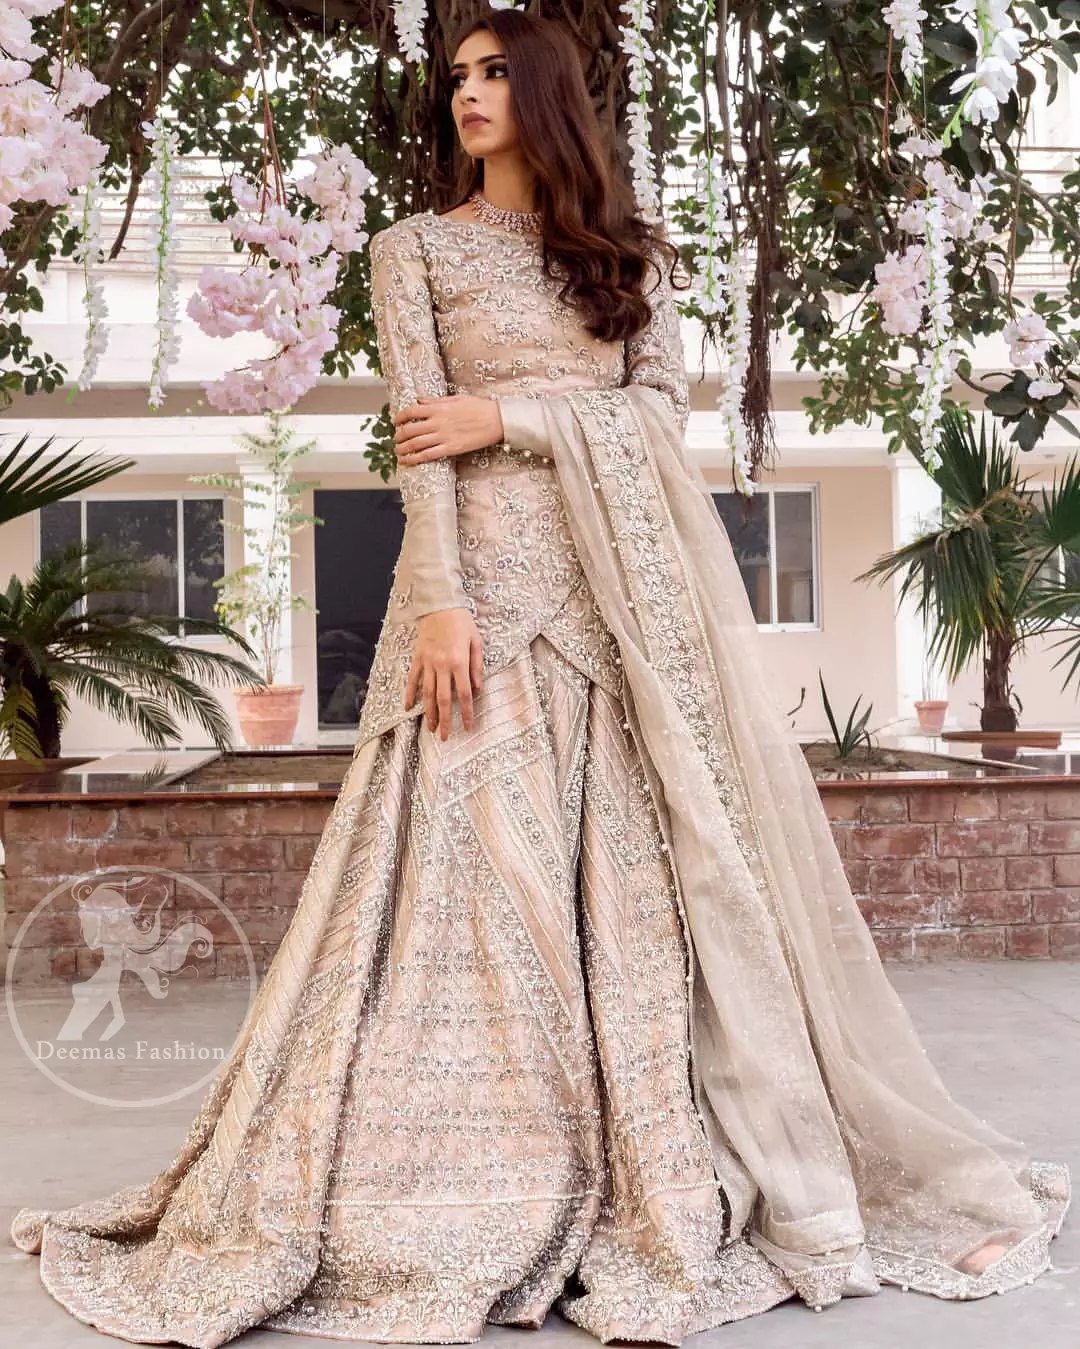 This outfit is adorned with kora, dabka, tilla, sequins and pearls. It is decorated with floral embellishments. It is overlapping shirt which adds to the look. It comes with heavy embellished lehengha allured with geometrical pattern all over it which has thick border on hemline. Tissue dupatta accompanies the garment. The dupatta has embellished borders on all four sides and small floral motifs all over it. The garment is lined with medium silk.